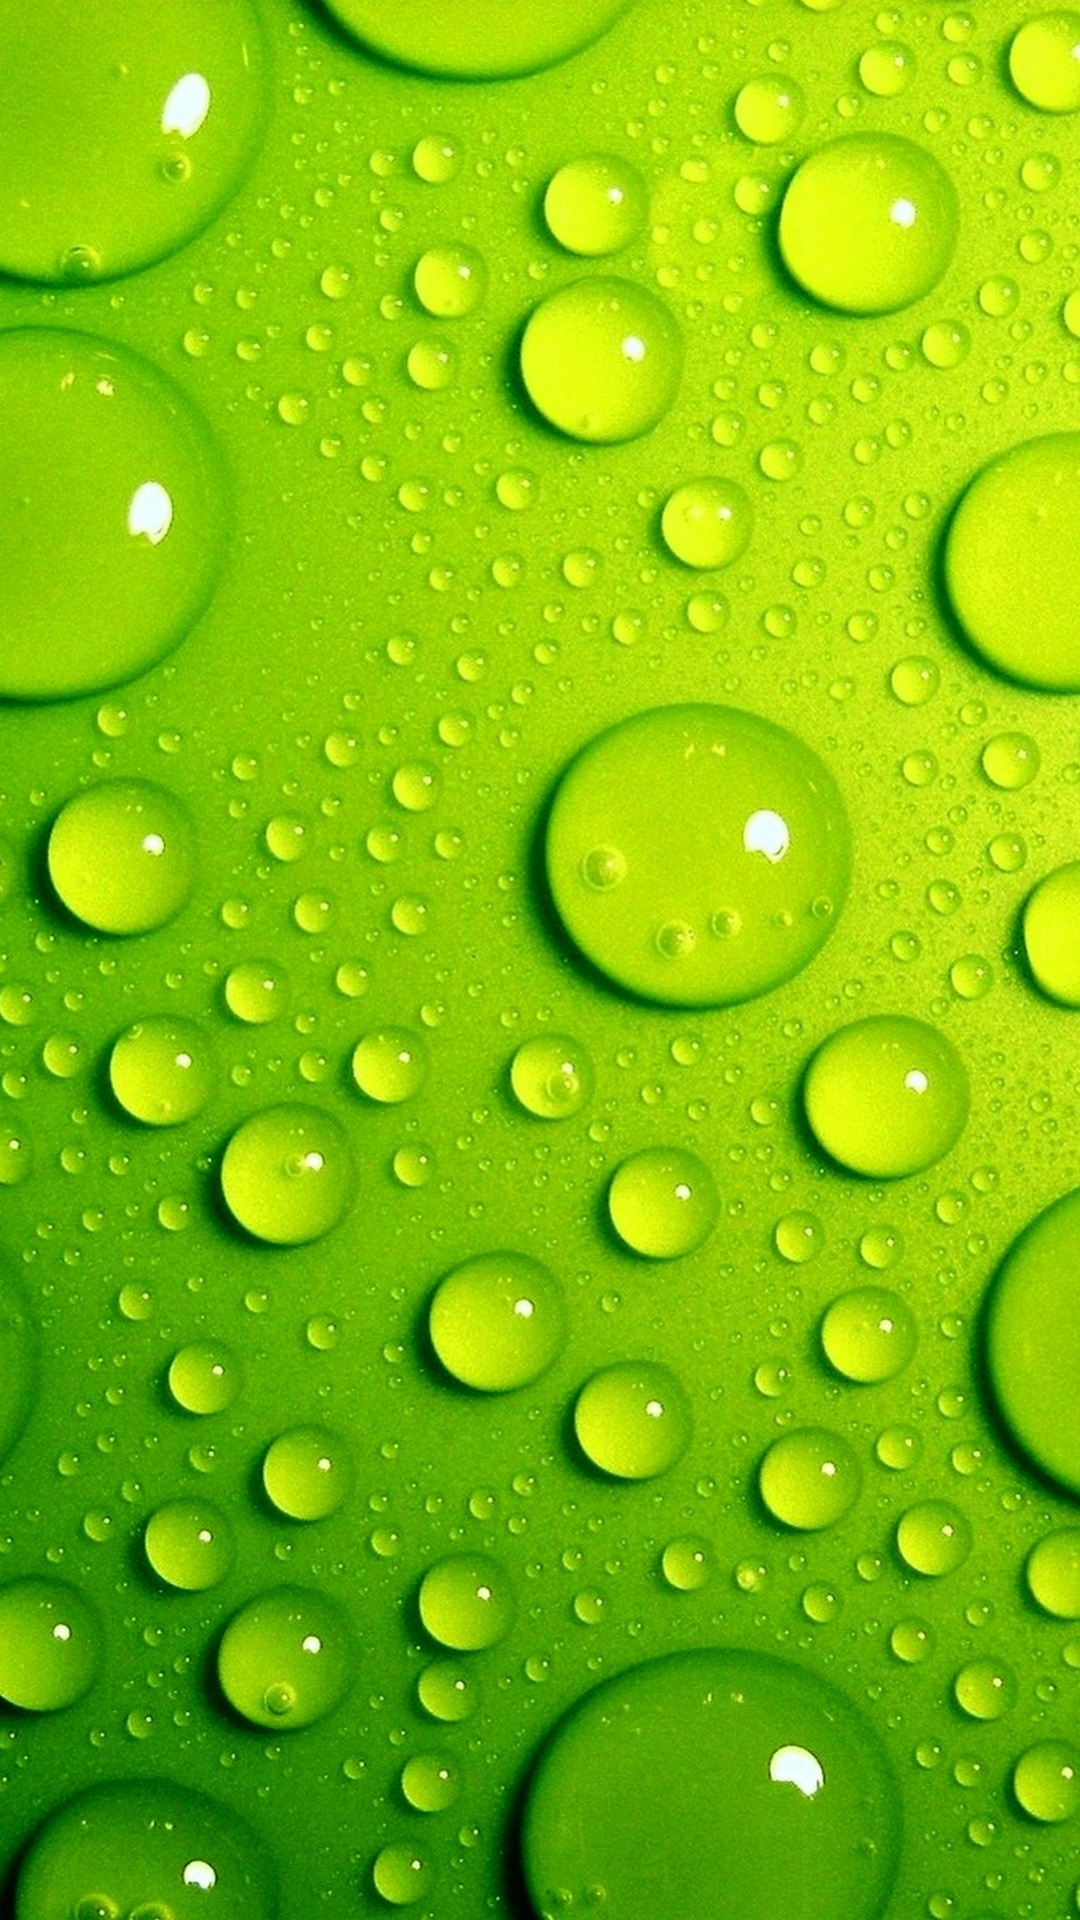 Lime Green Iphone Wallpaper With Image Resolution Pixel - Green Wallpaper Hd Iphone - HD Wallpaper 